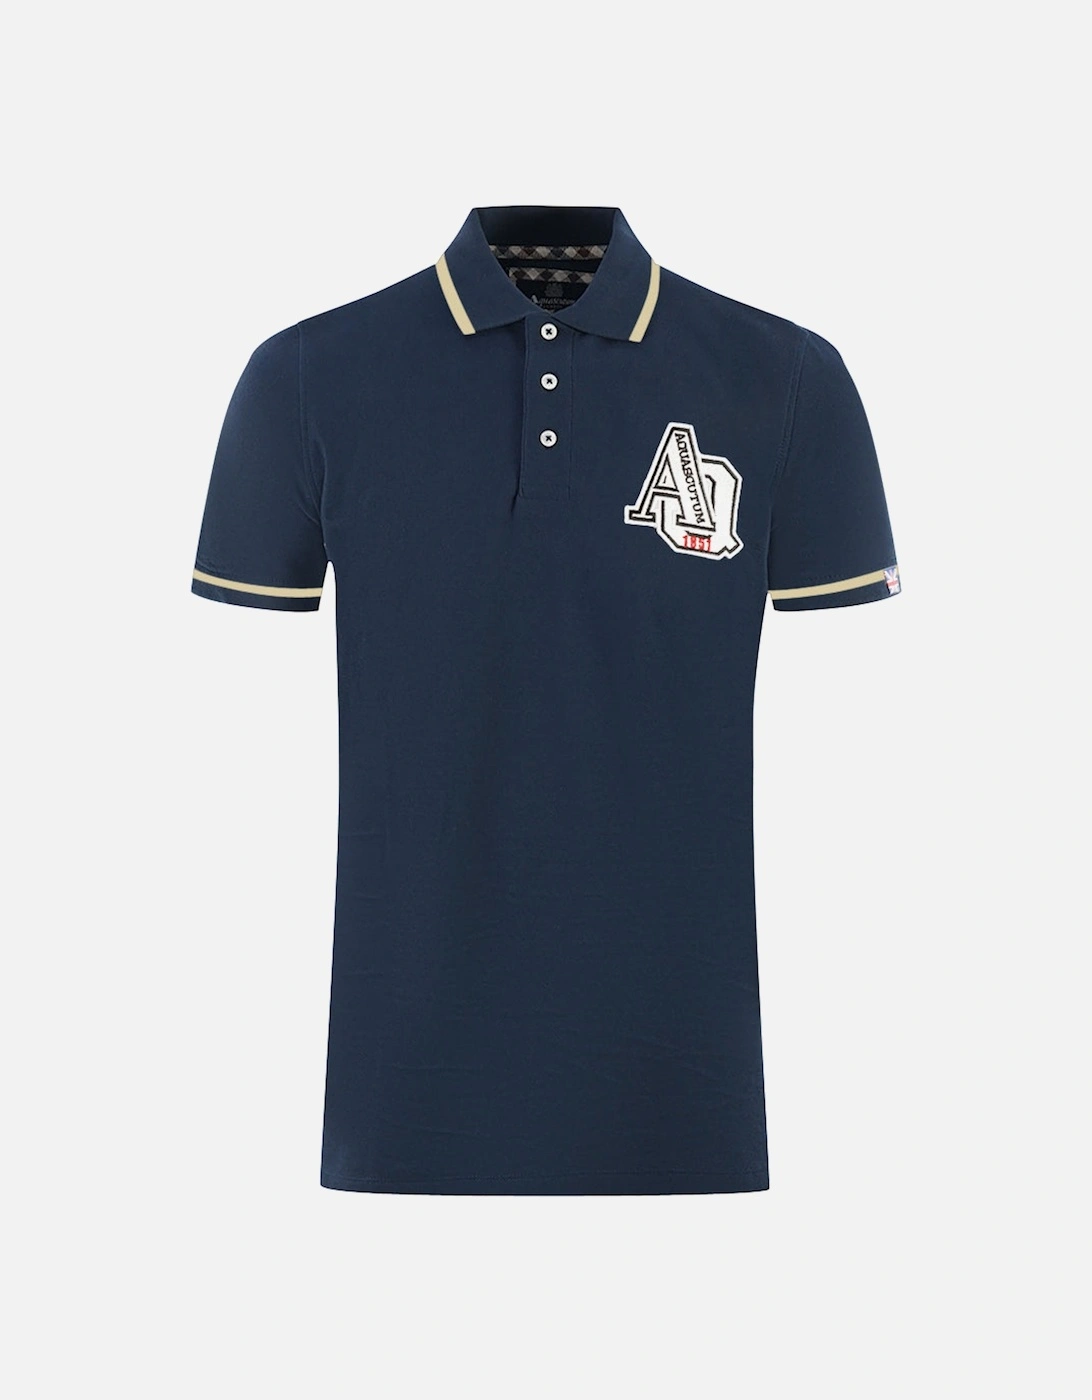 AQ 1851 Embroidered Tipped Navy Blue Polo Shirt, 4 of 3